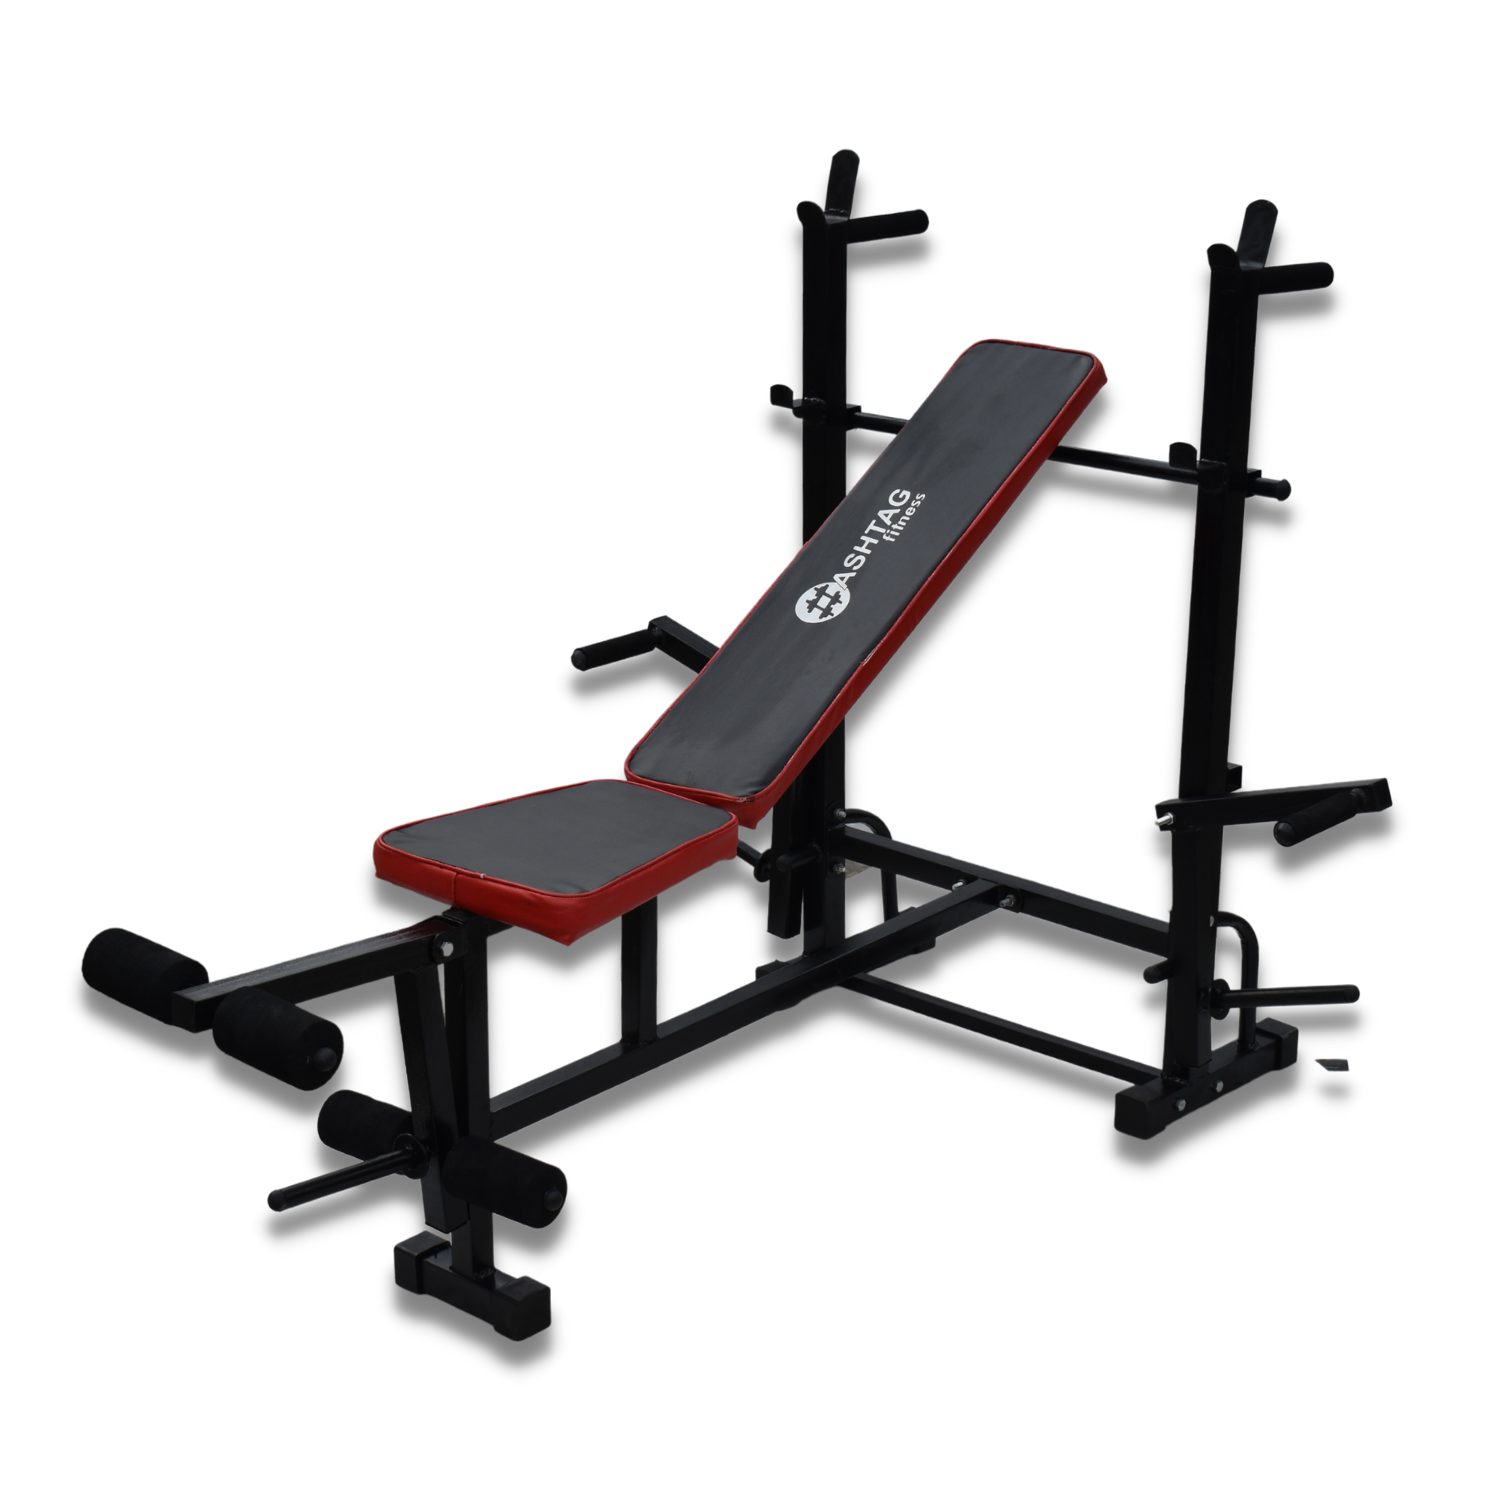 Hashtag Fitness 8in1 multi-purpose & chest press home gym bench - Hashtag  Fitness : Online gym equipments for home